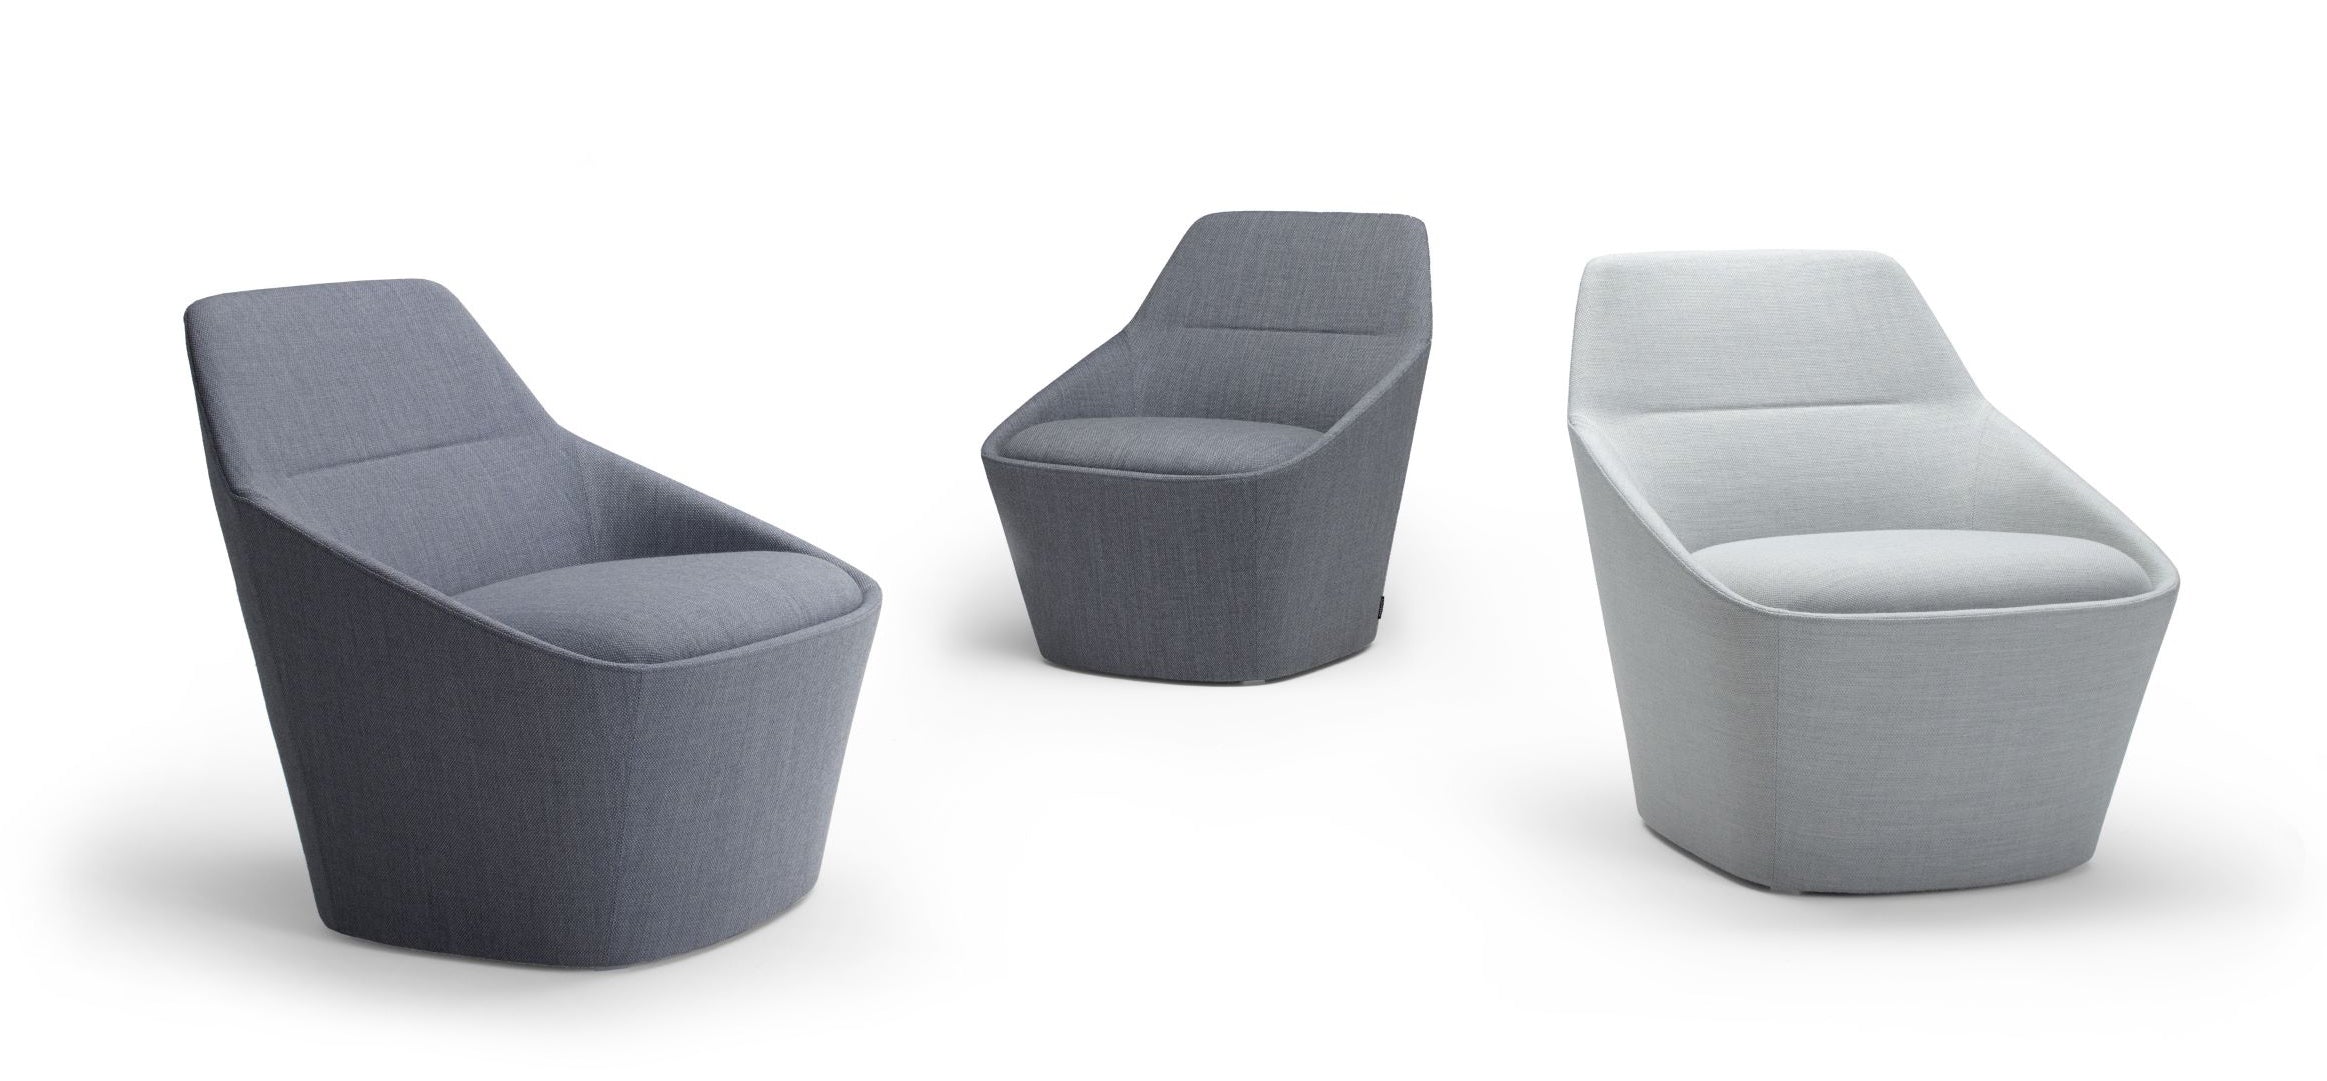 Offecct Ezy Easy Lounge Sofa Chair